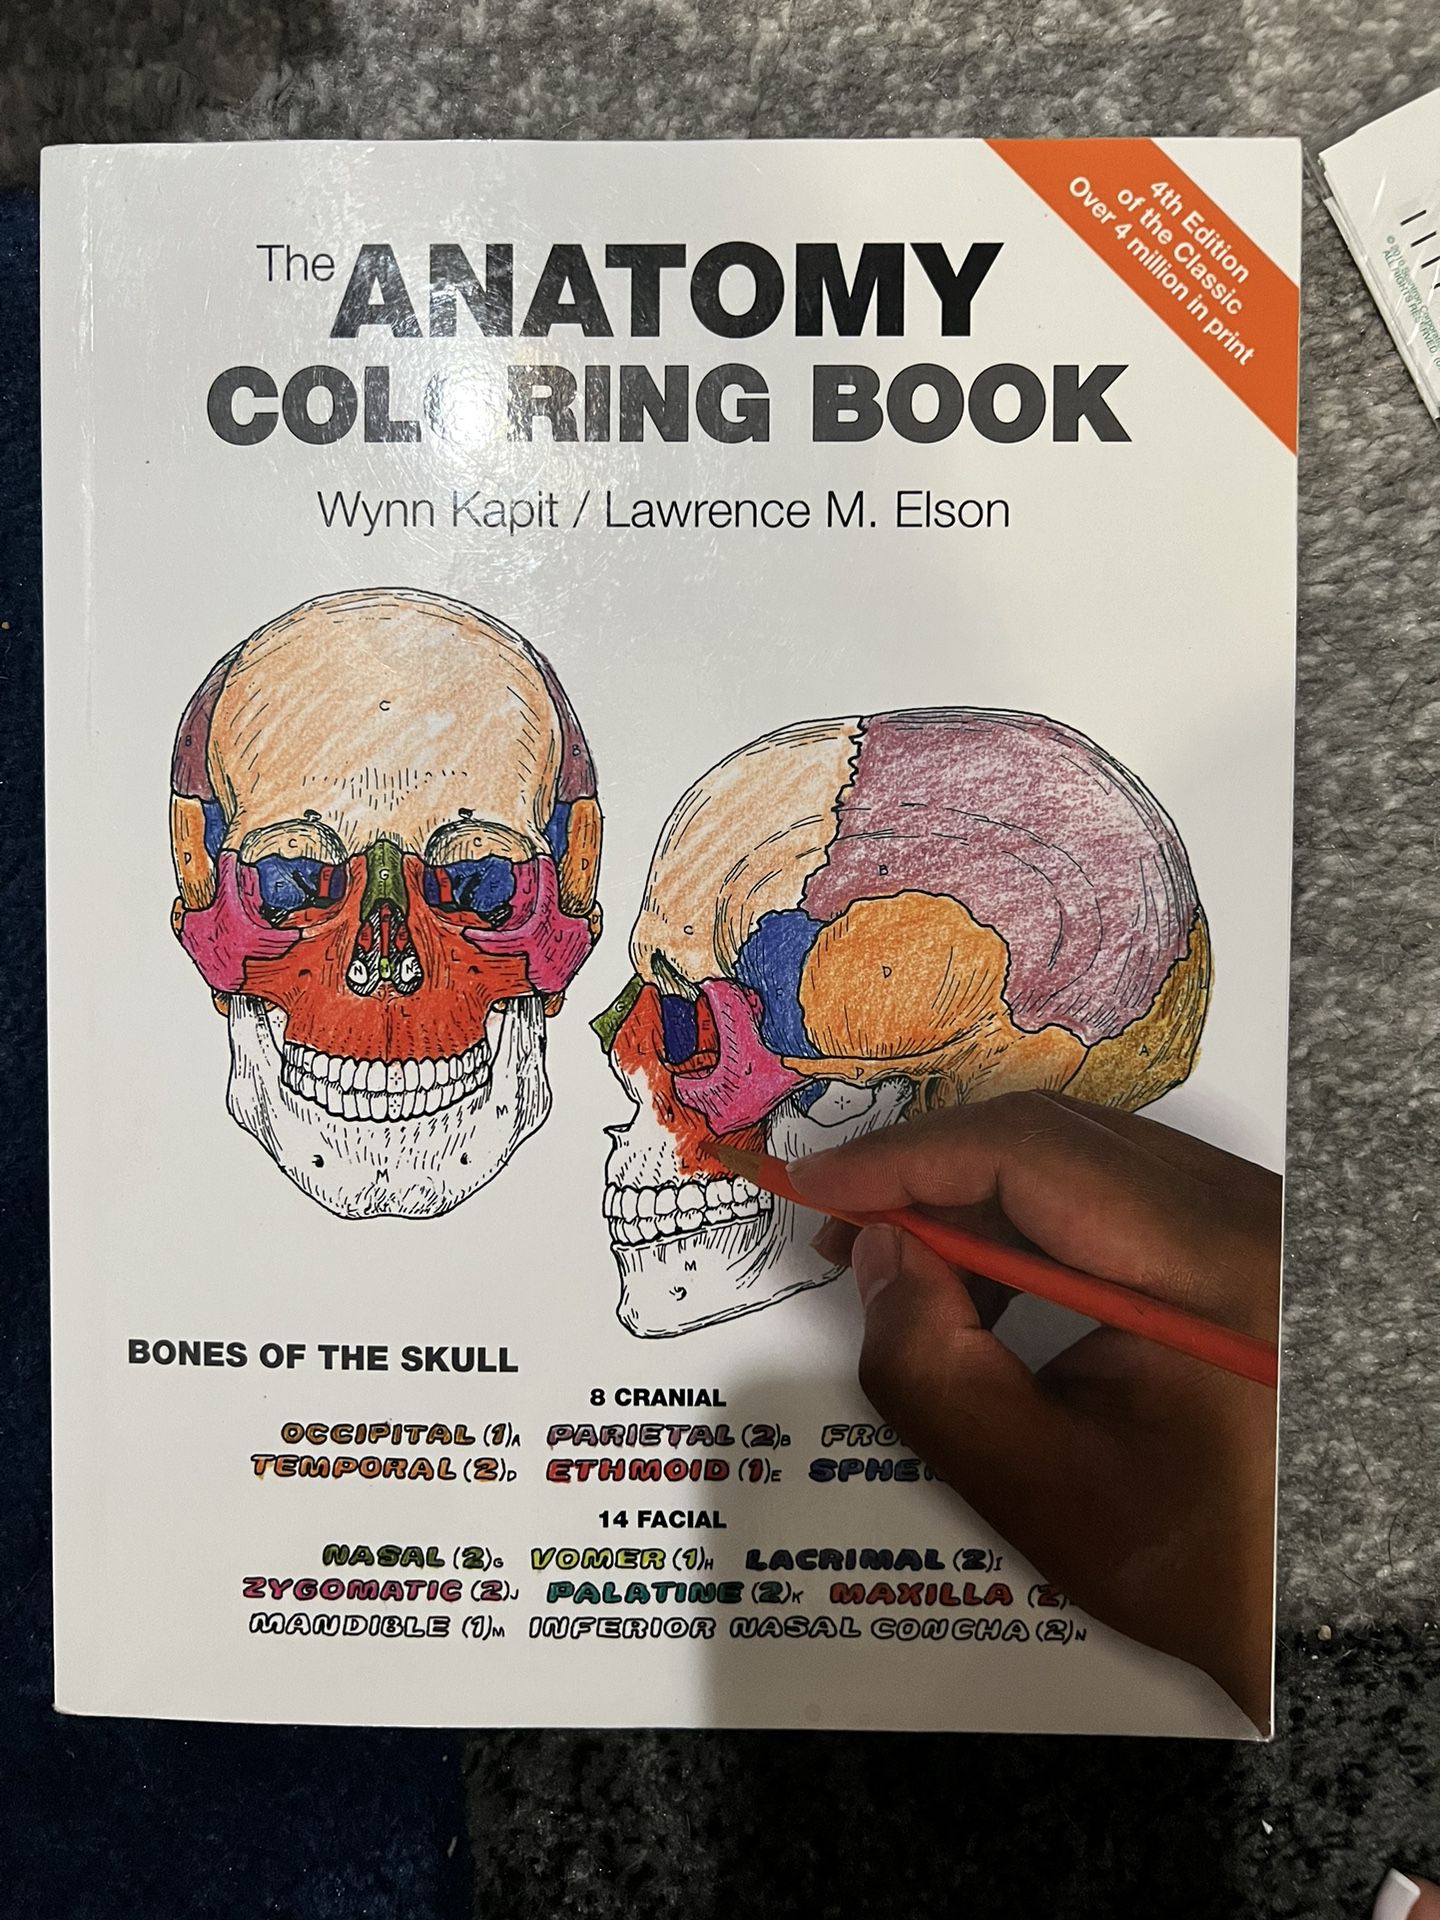 Anatomy Coloring Book 